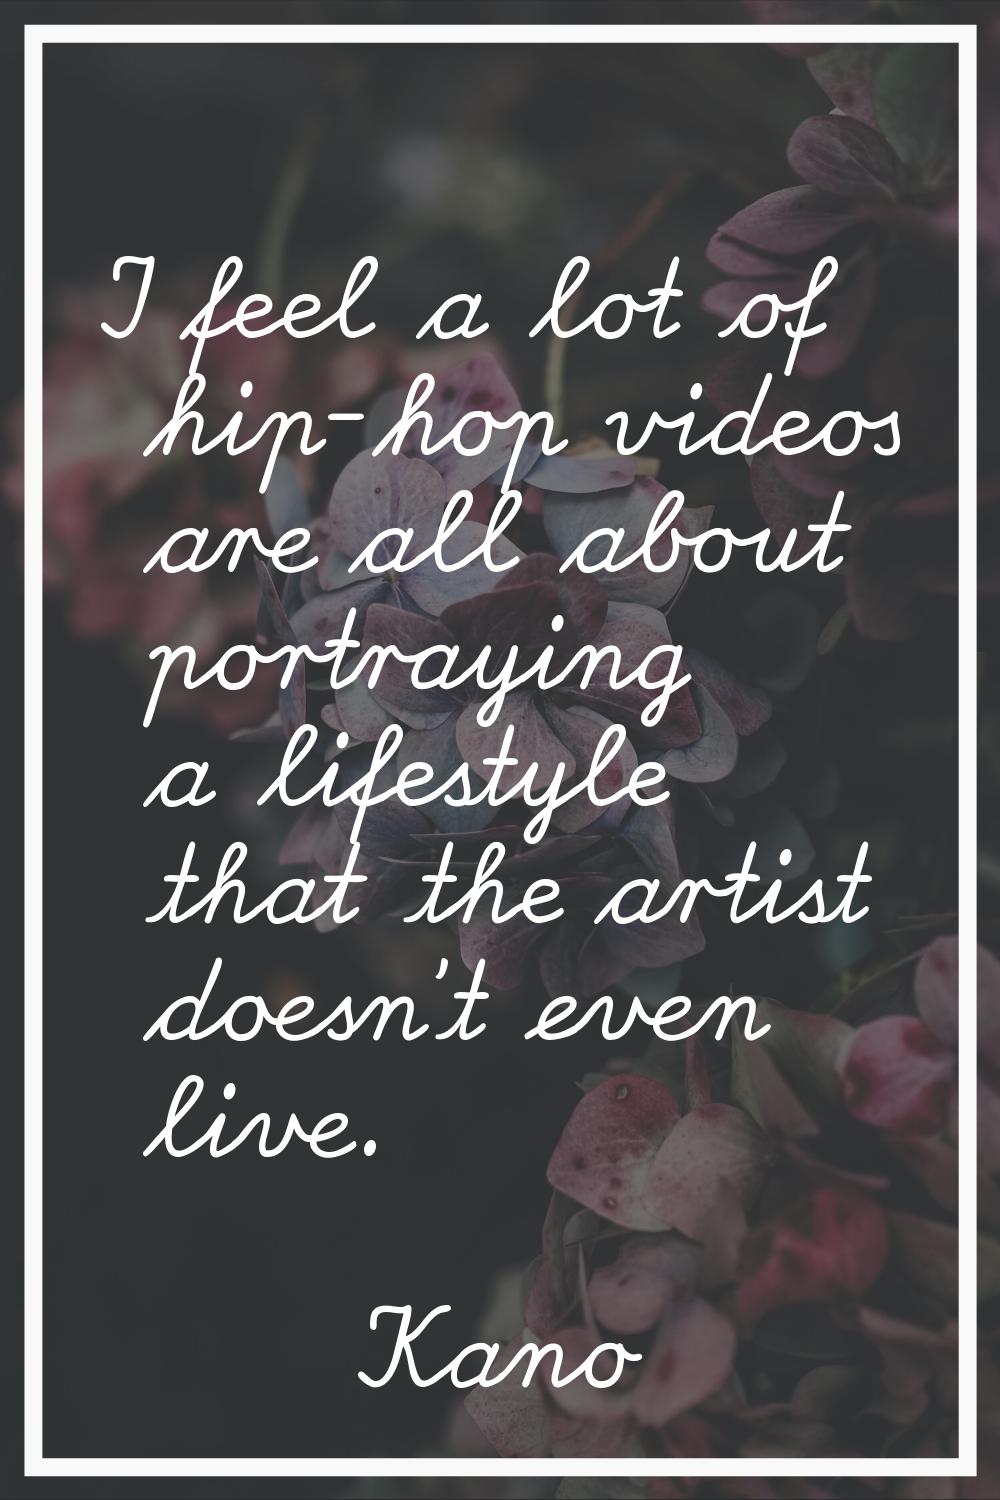 I feel a lot of hip-hop videos are all about portraying a lifestyle that the artist doesn't even li